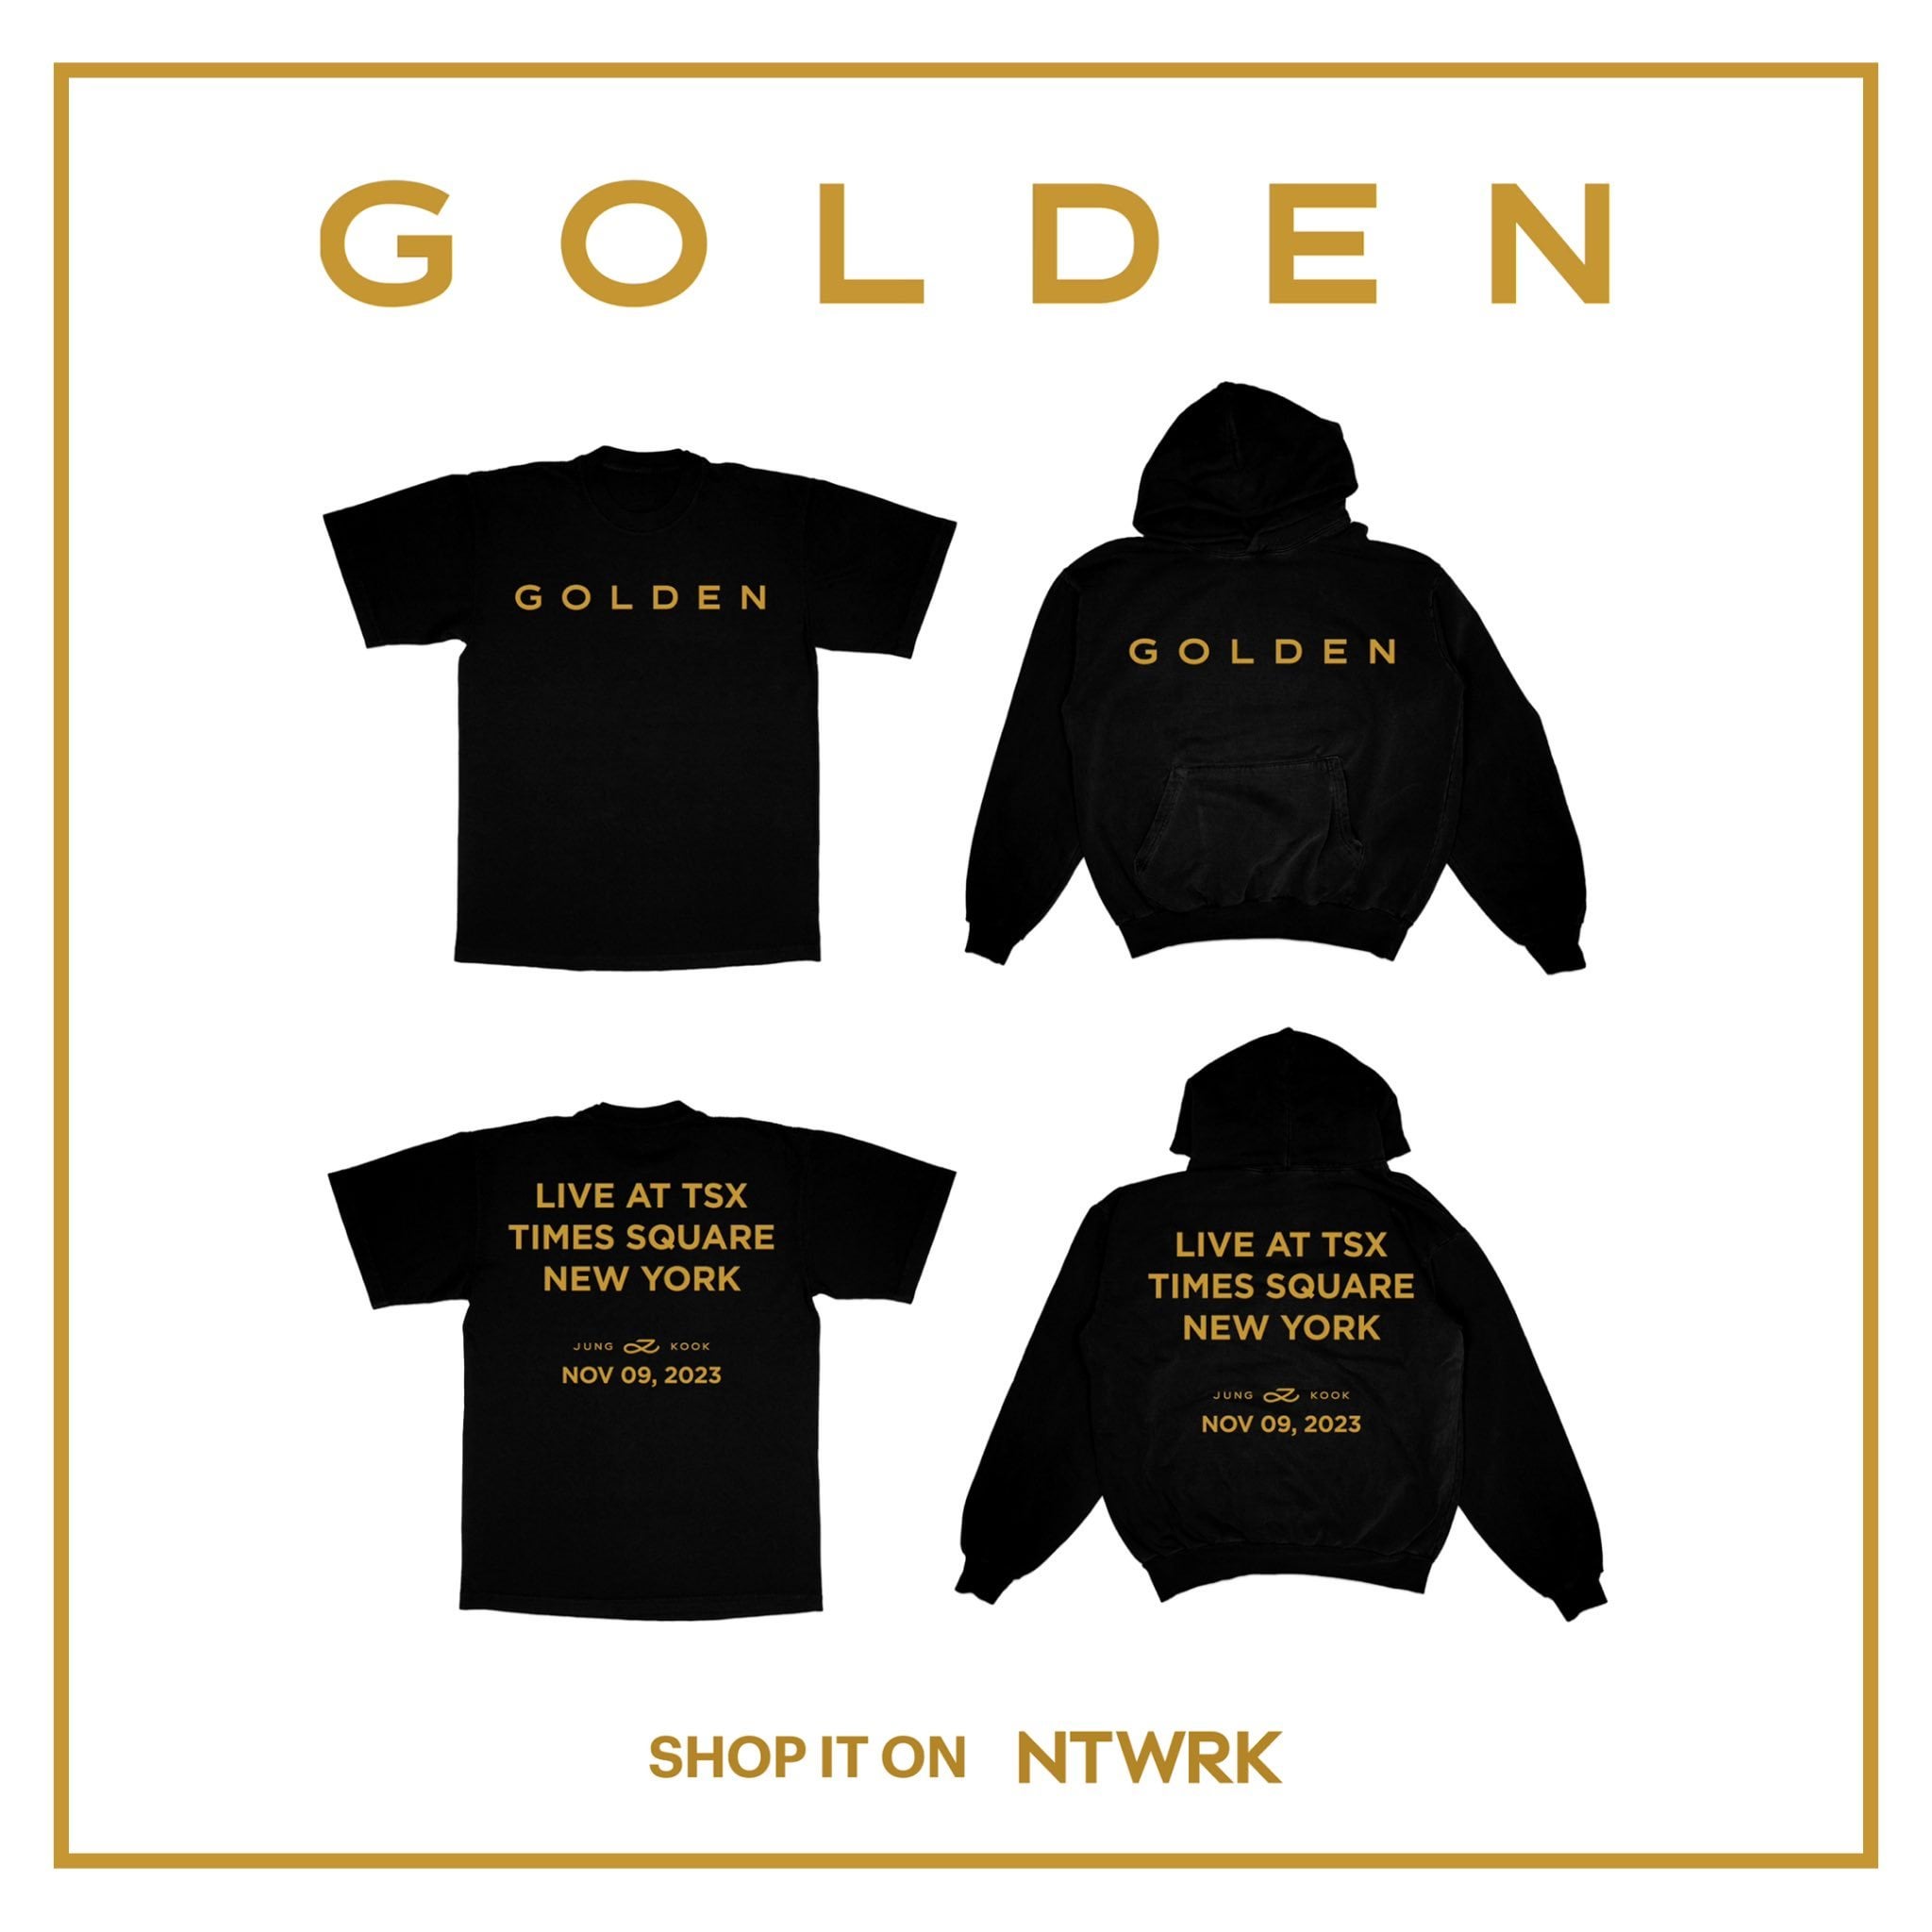 Geffen: Golden TXS merch available for a limited time